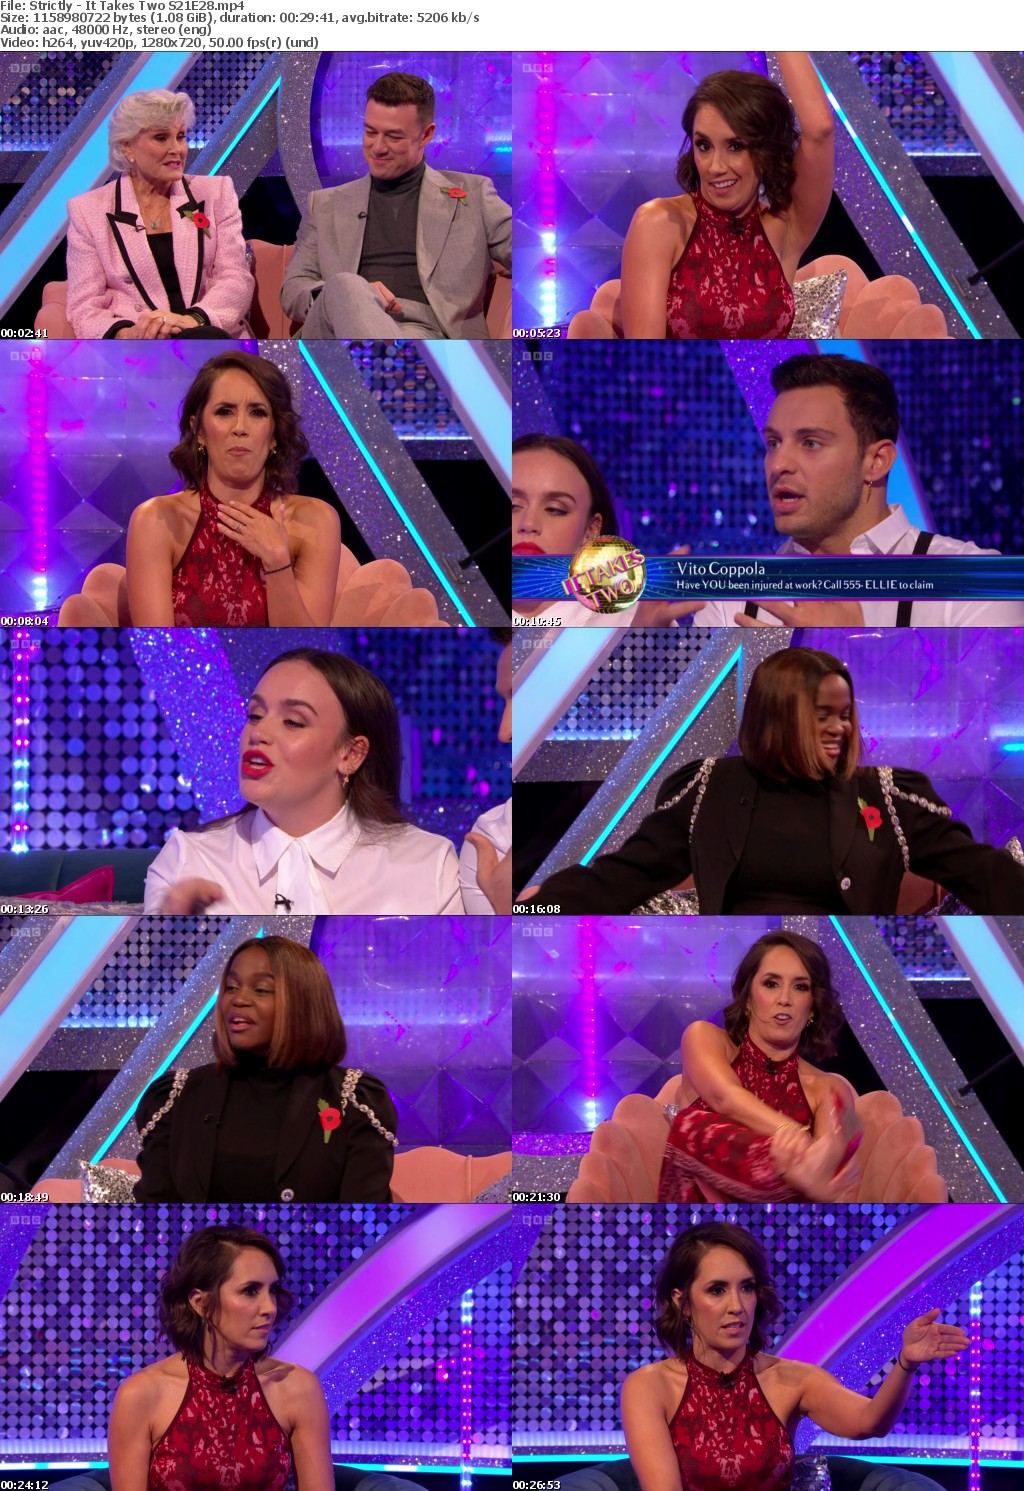 Strictly - It Takes Two S21E28 (1280x720p HD, 50fps, soft Eng subs)